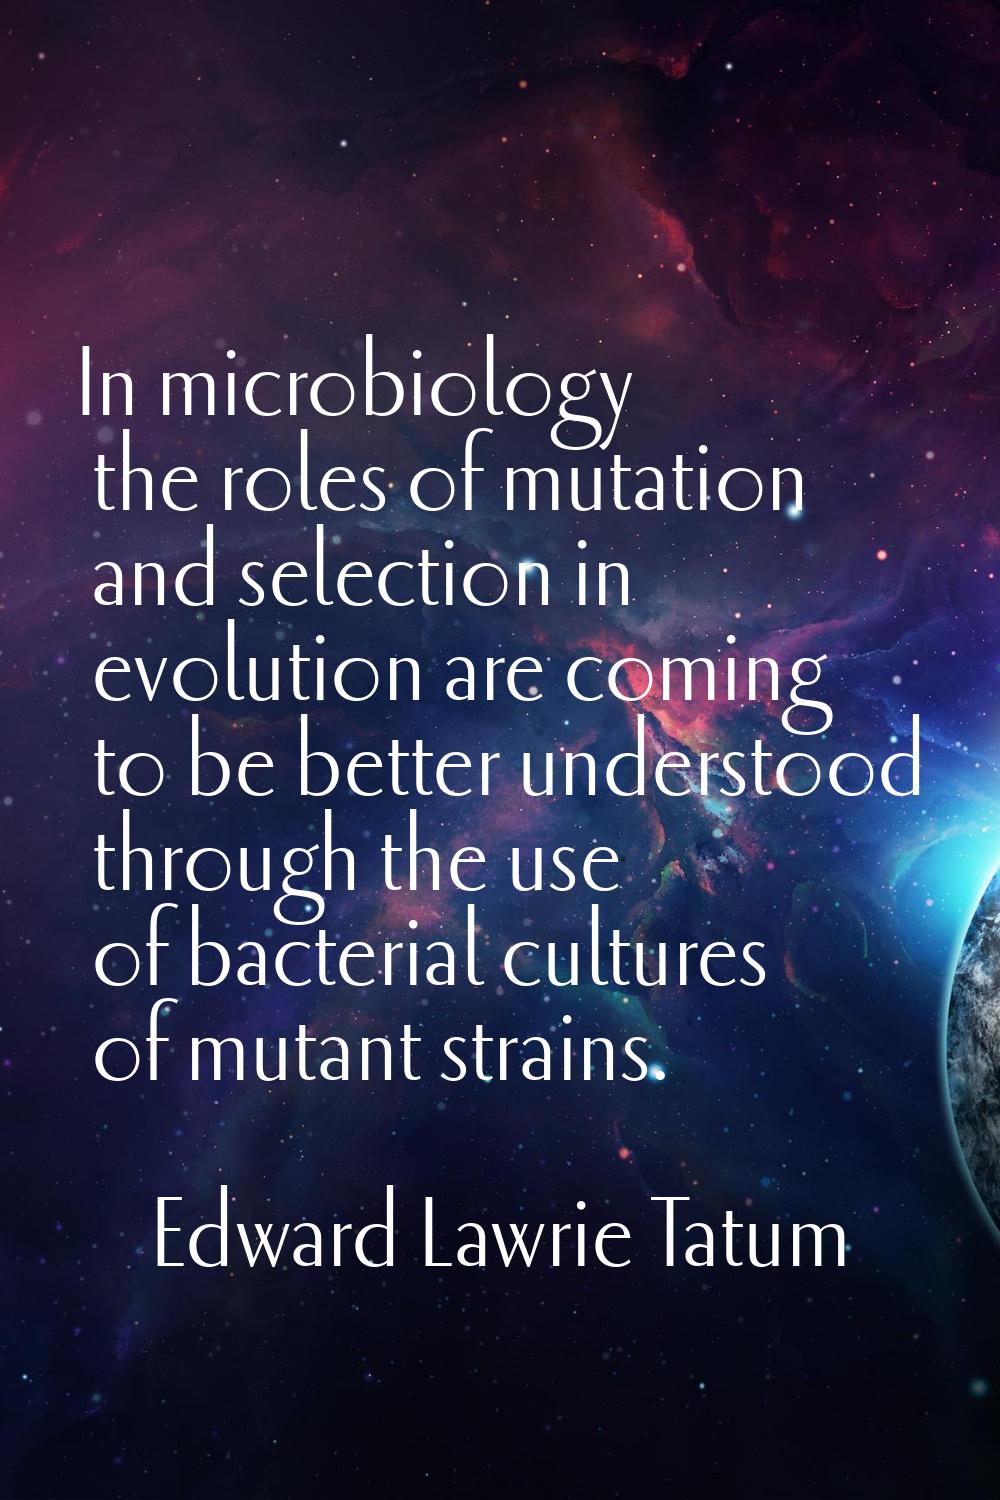 In microbiology the roles of mutation and selection in evolution are coming to be better understood